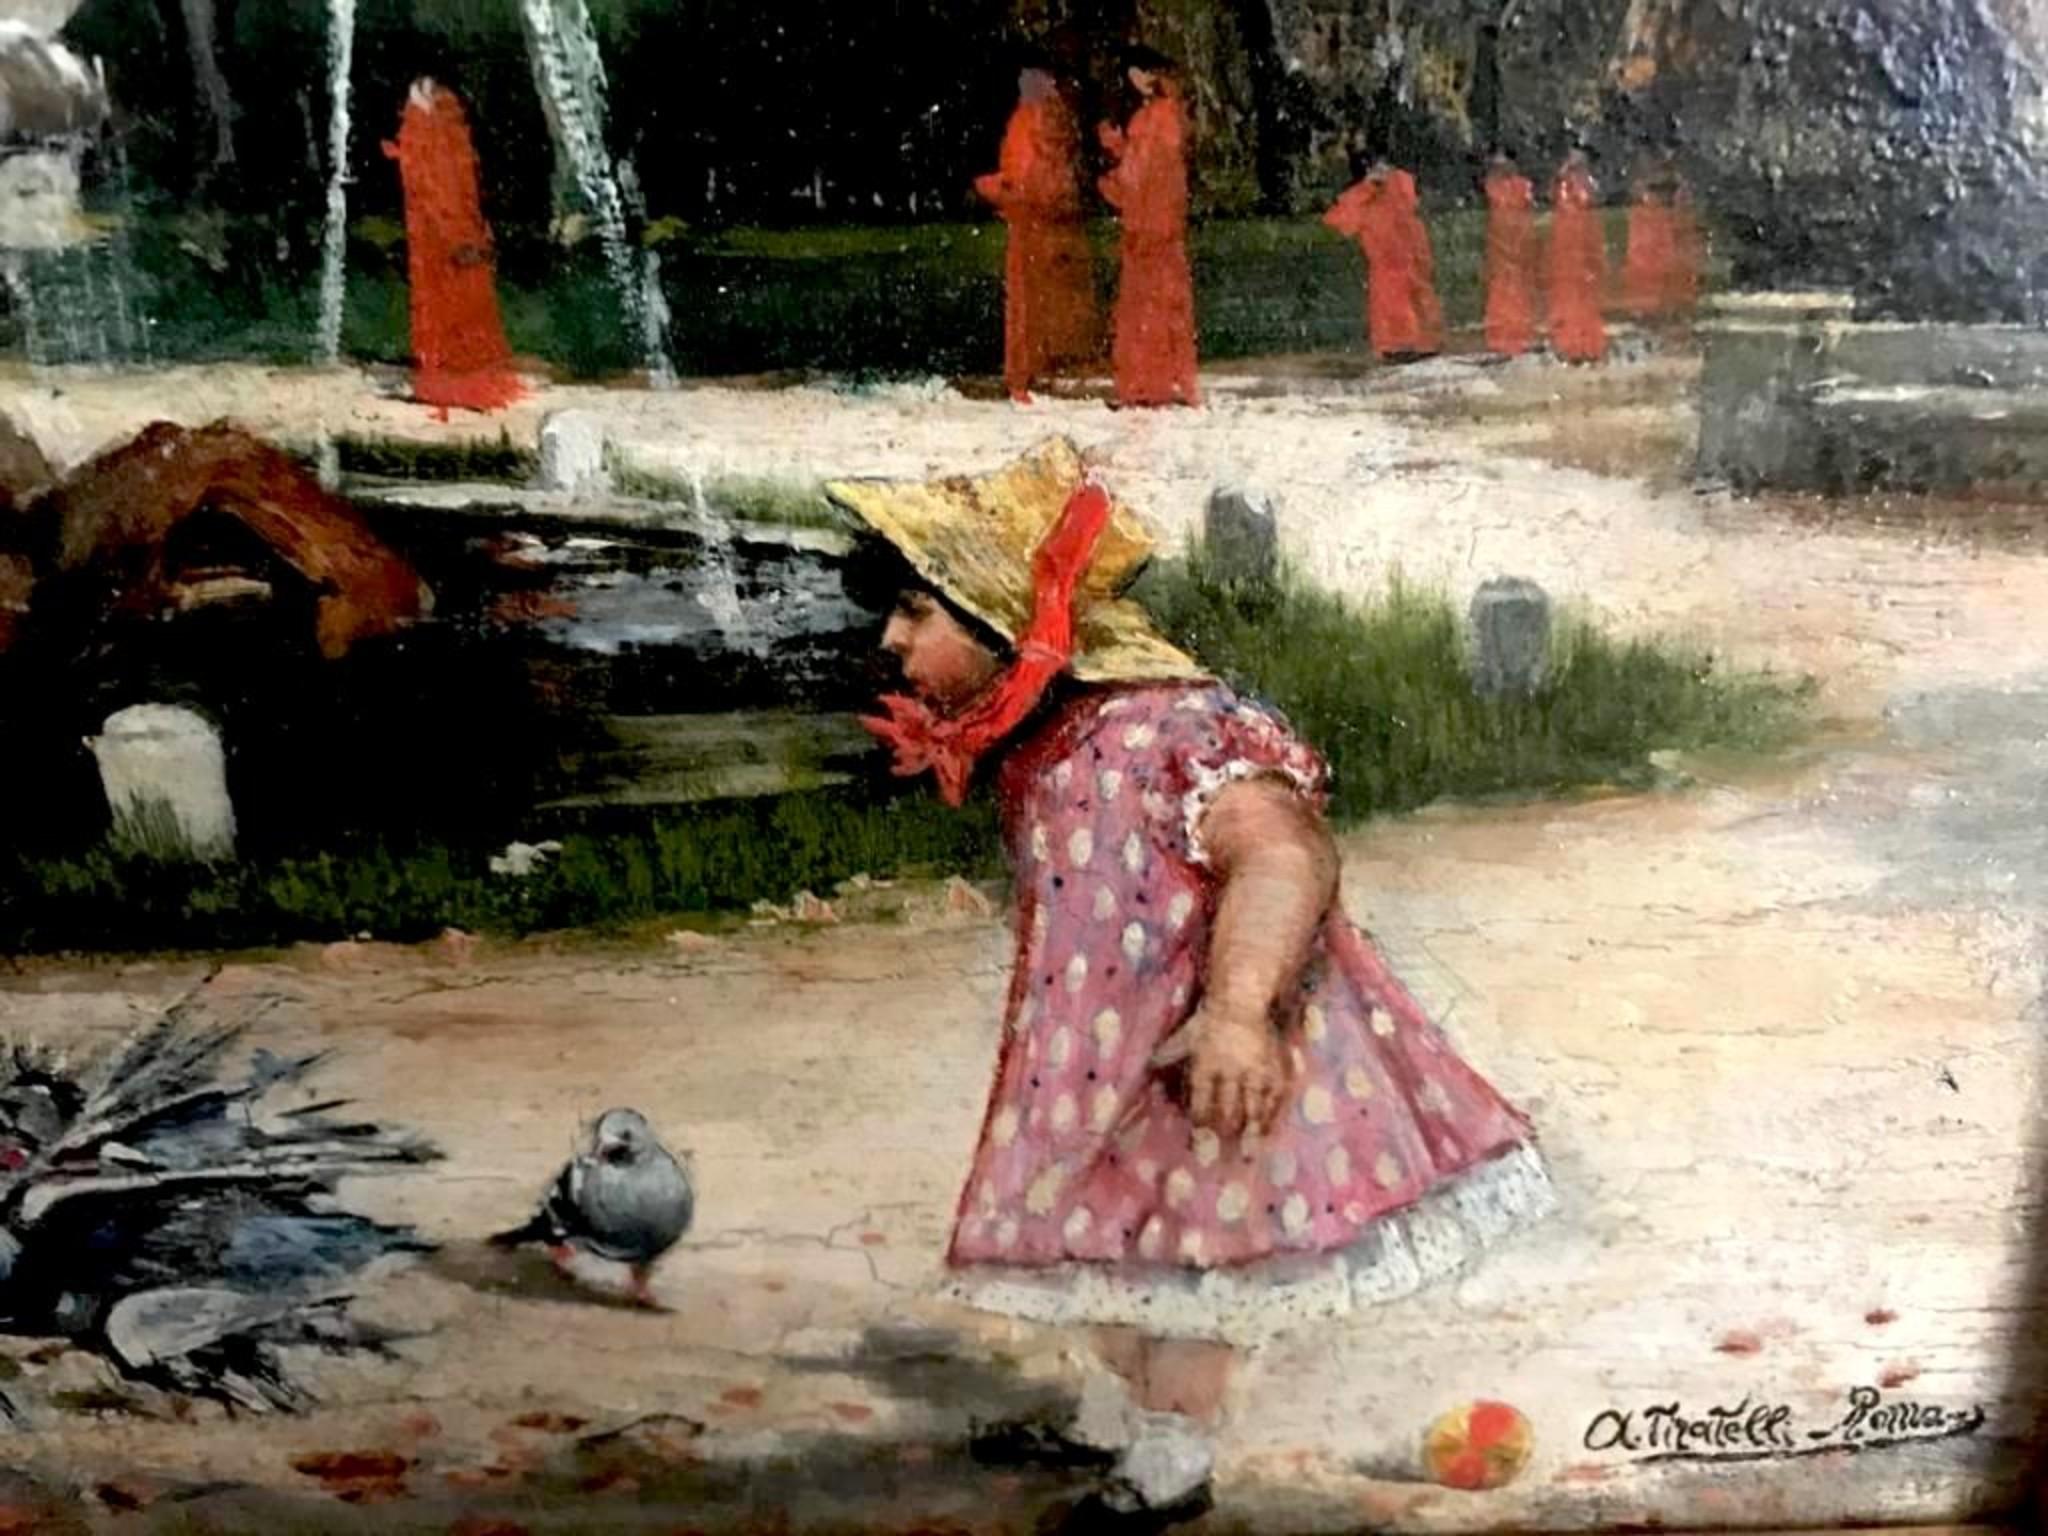 AURELIO TIRATELLI(1842-1900) 
The Garden
Oil on wood
 Signed and located in Rome.
 Framed.
 7 inches (h) x 12 inches (w) wood. 
22 inches (h) x 27 inches (w) framed. 
At the back has a number: 

BIO:​​He was born in Rome. He studied at the Accademia